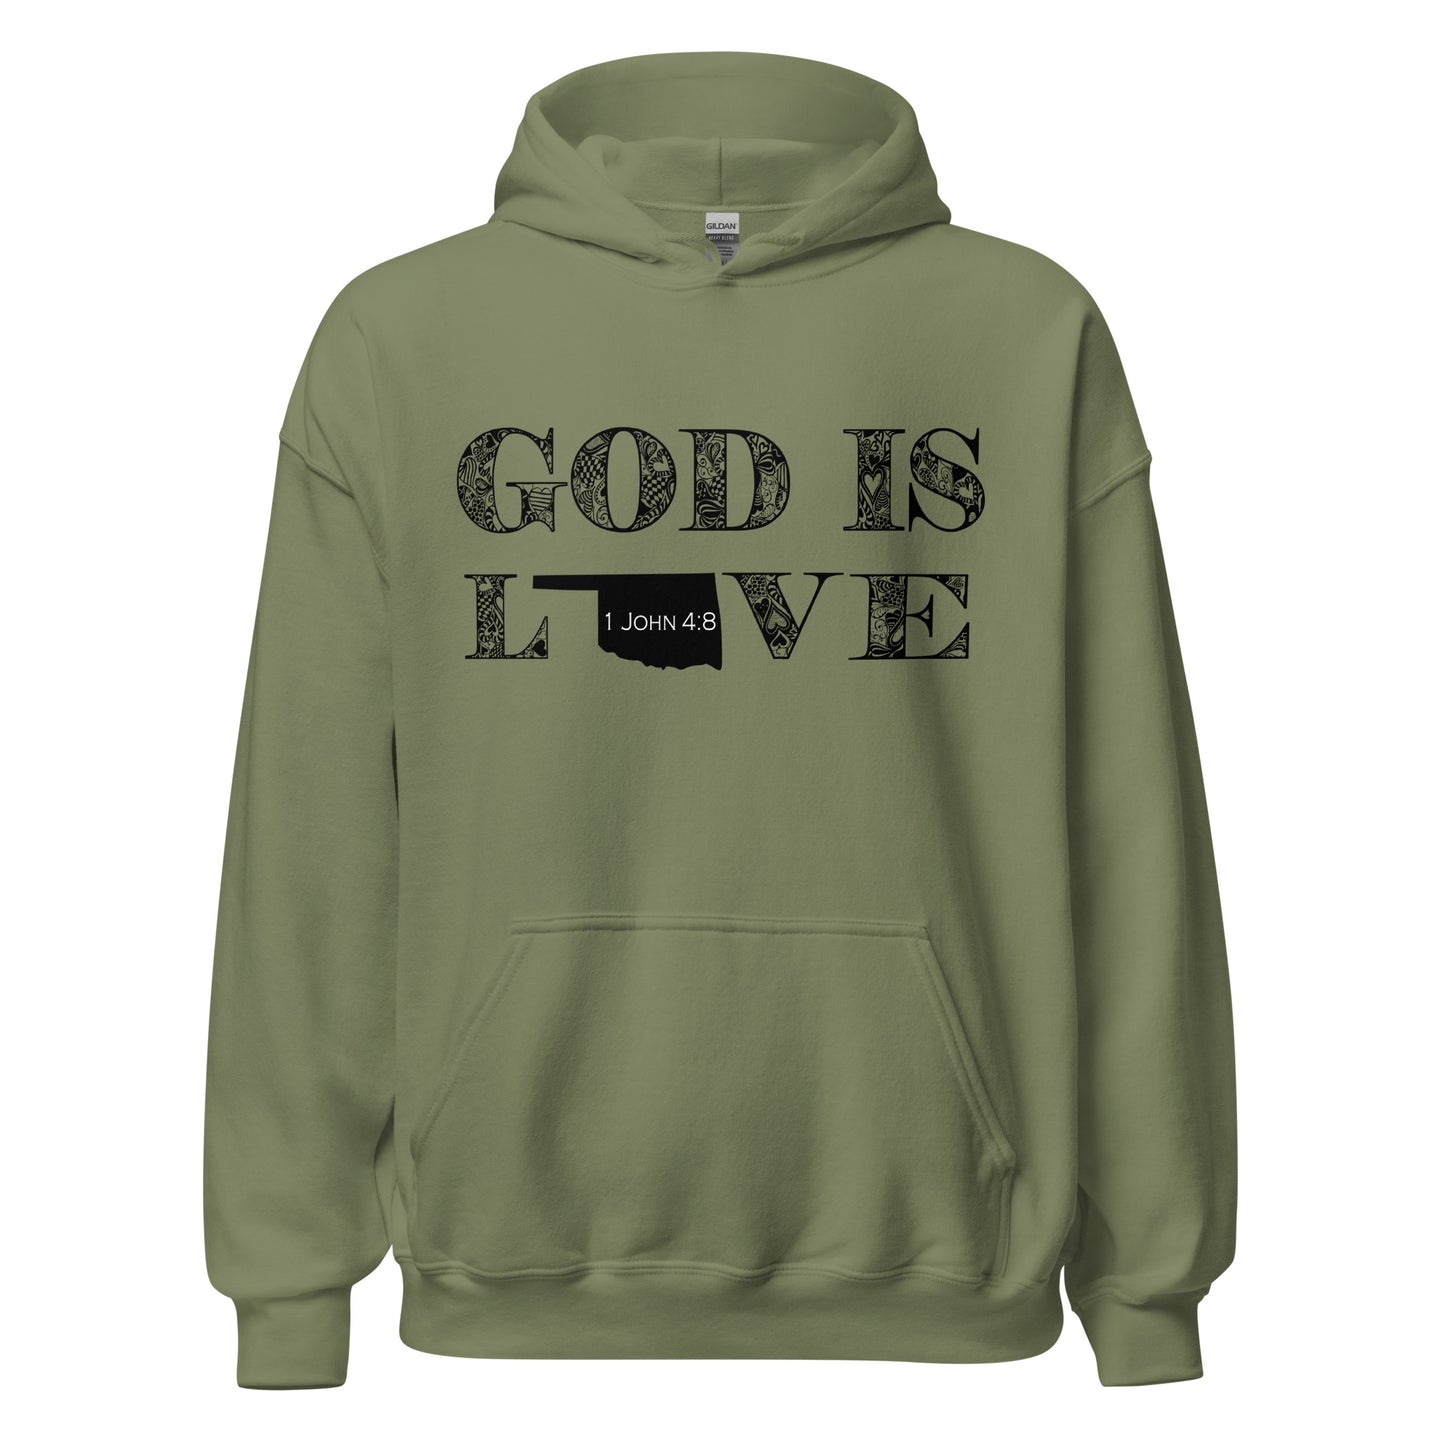 1 John 4:8 God Is Love Unisex Oklahoma Hoodie in Military Green - front view with hood down